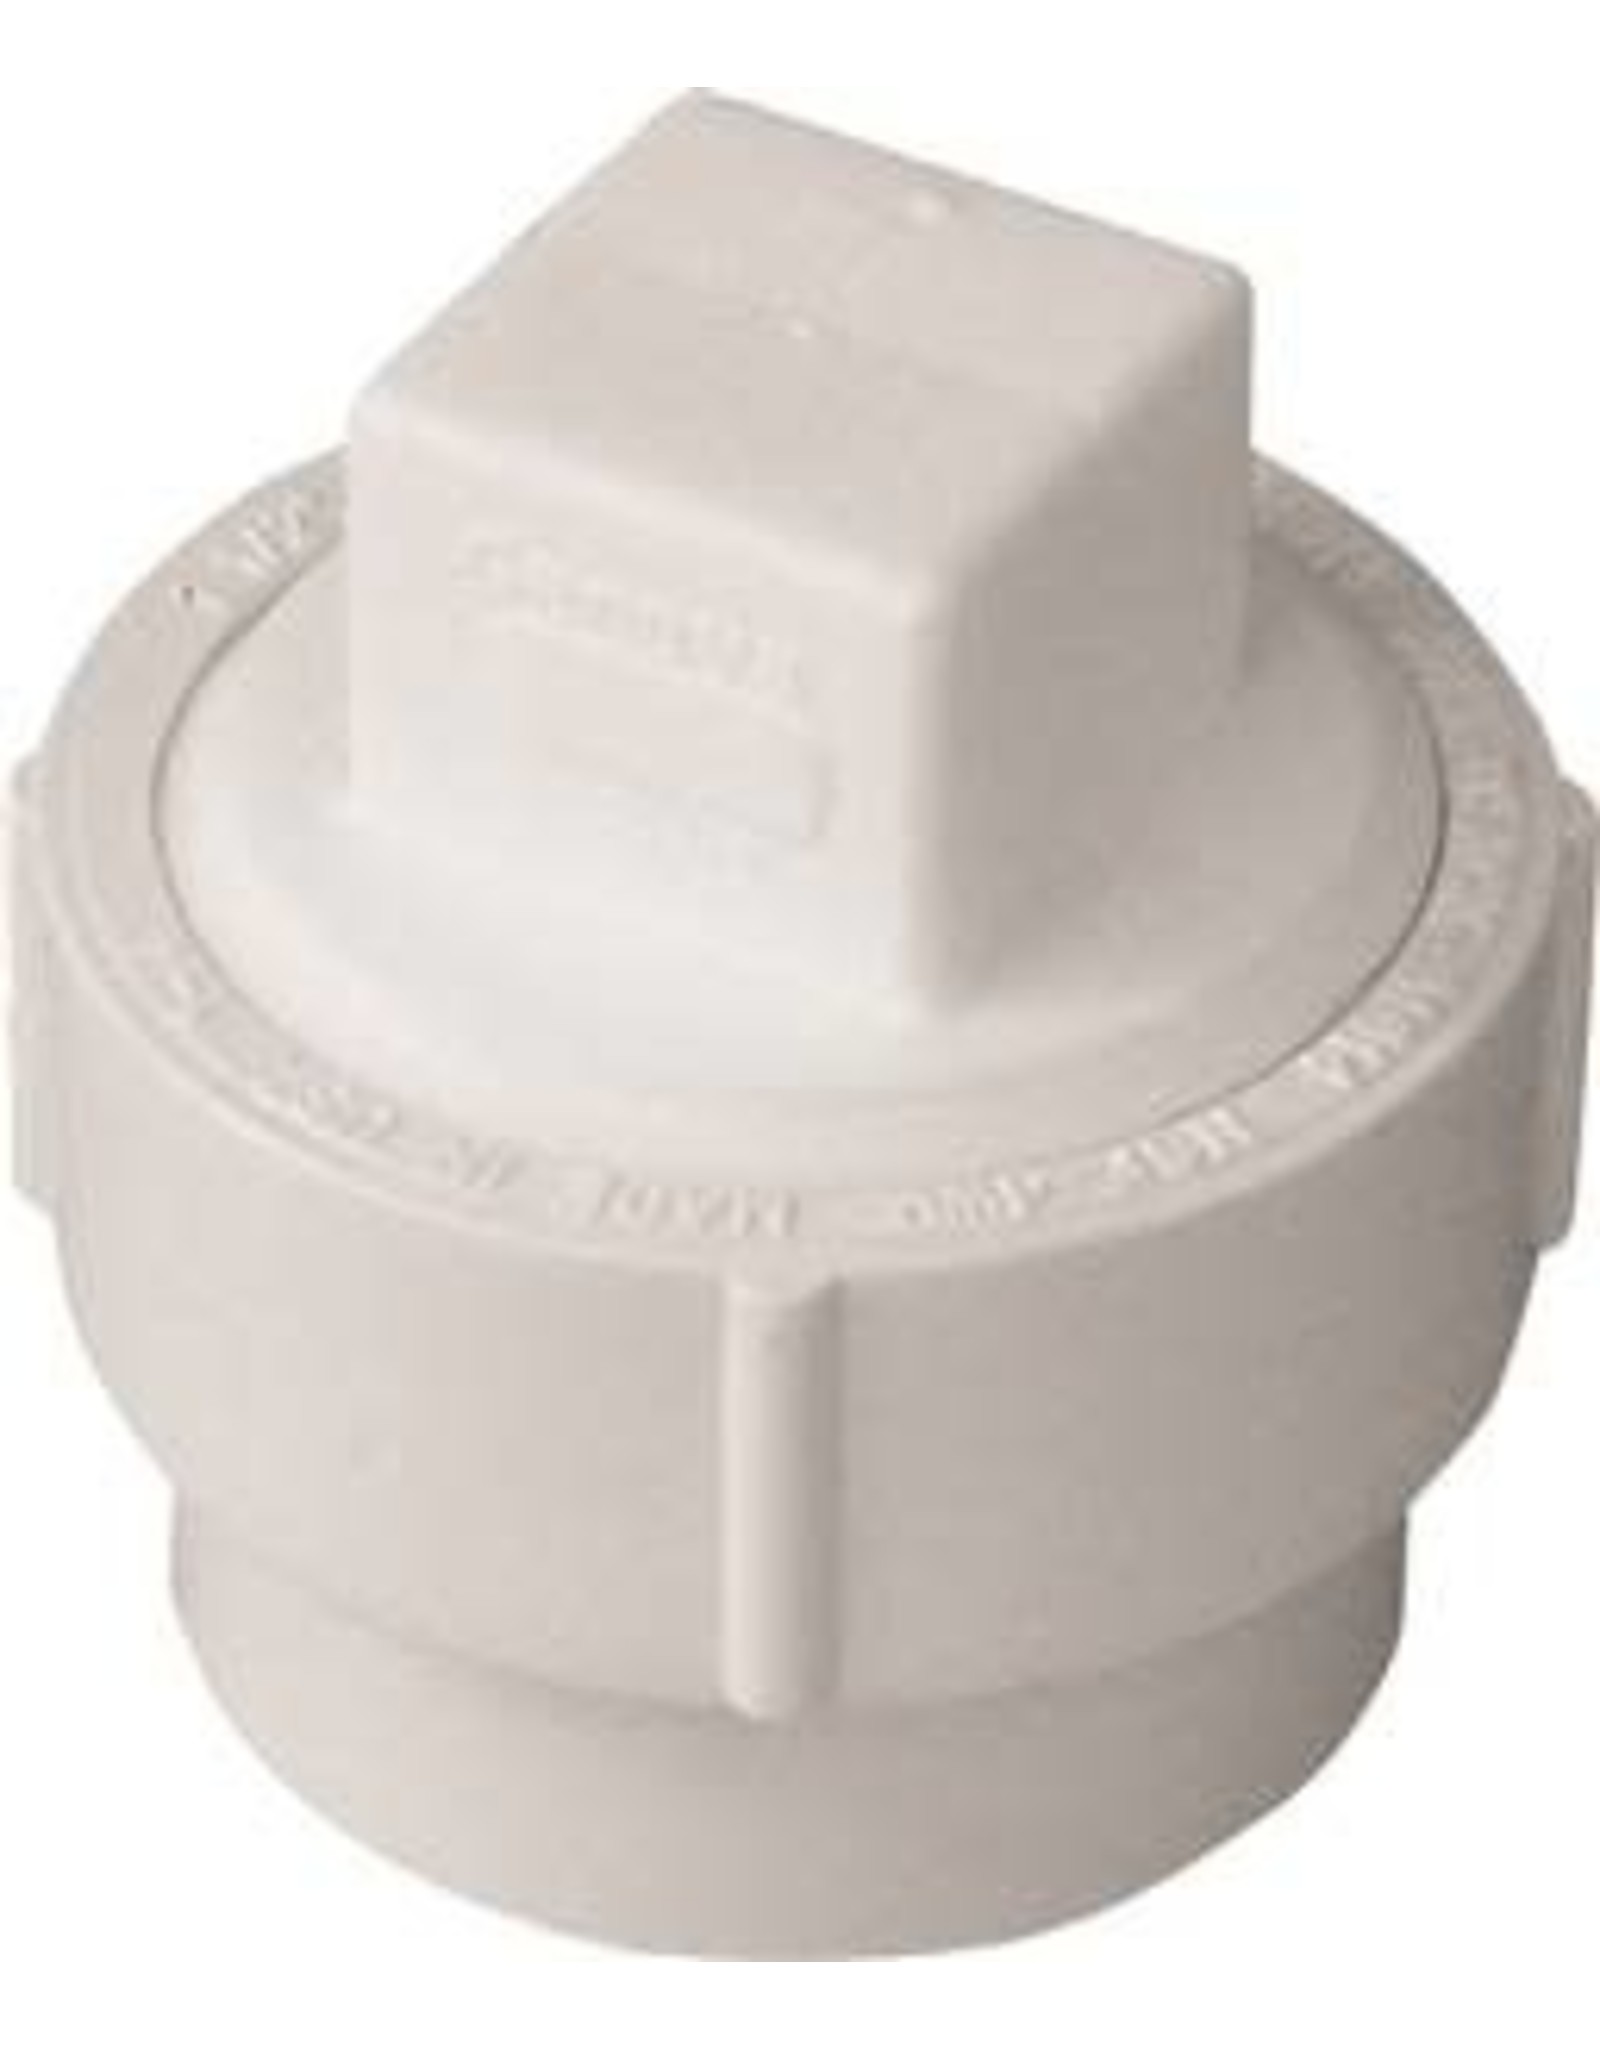 Ipex CANPLAS 193704AS Cleanout Body with Threaded Plug, 4 in, Spigot x FNPT, PVC, White